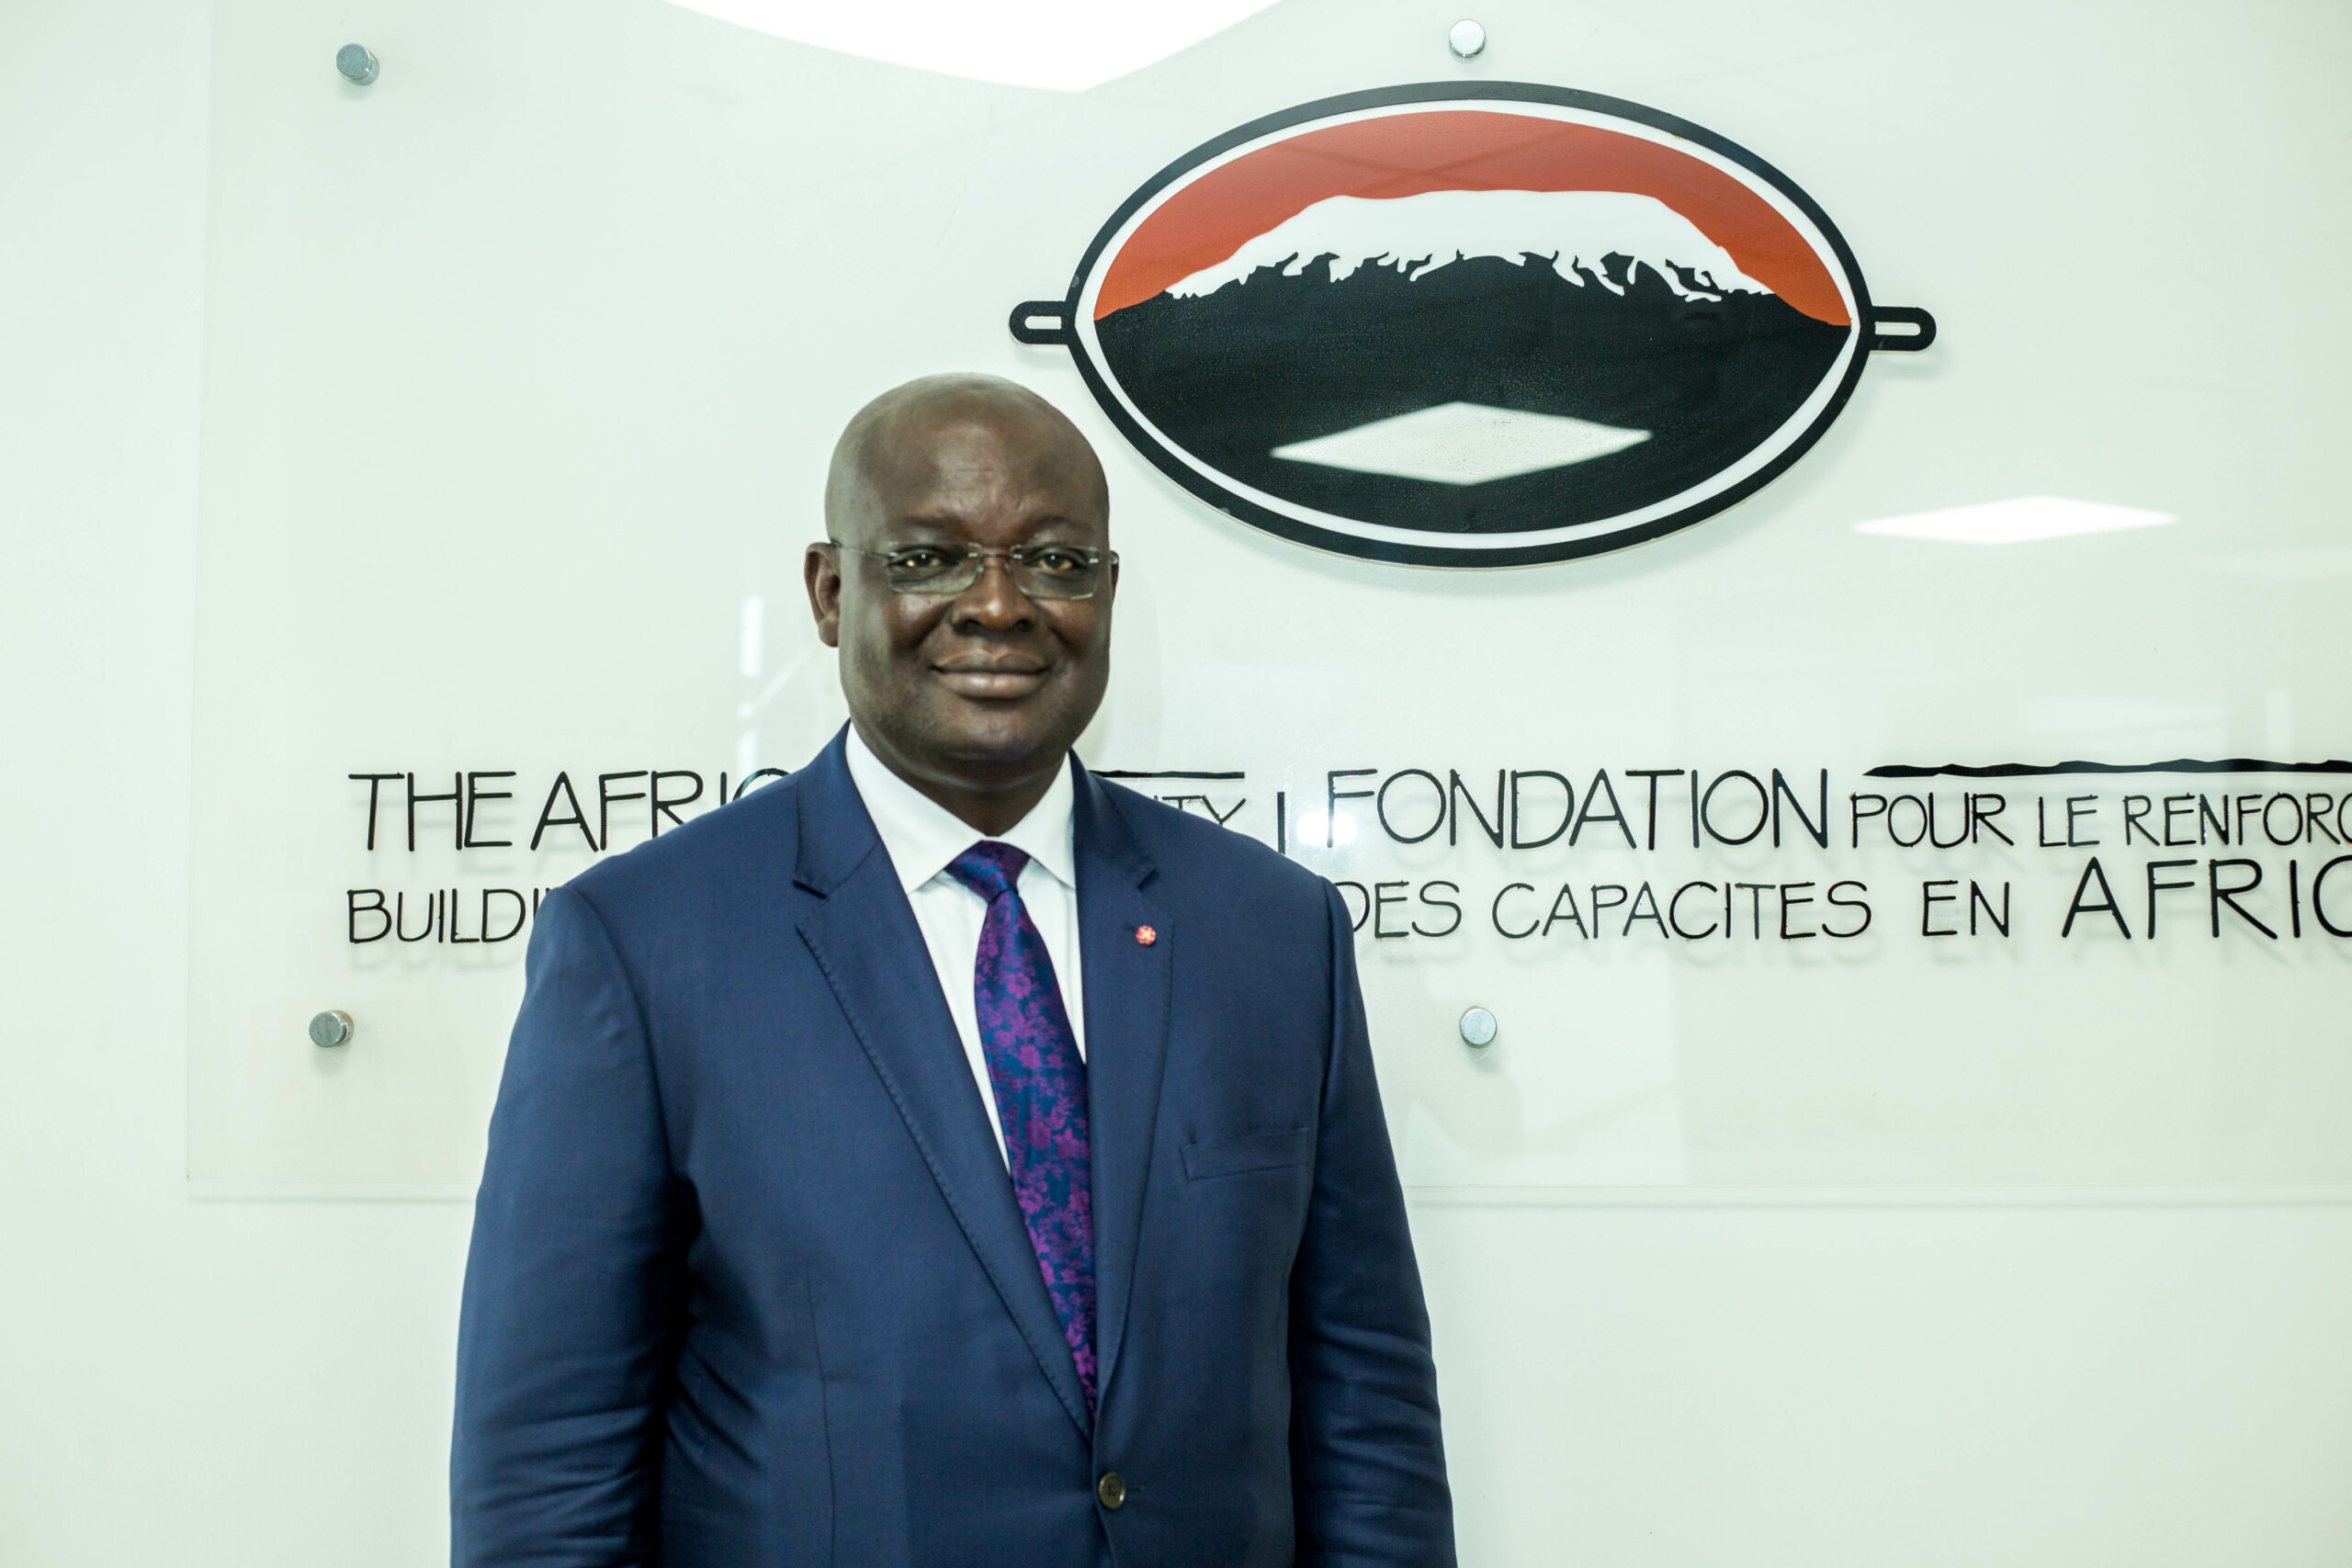 African Capacity Building Foundation to set up School of Regulation in Ghana